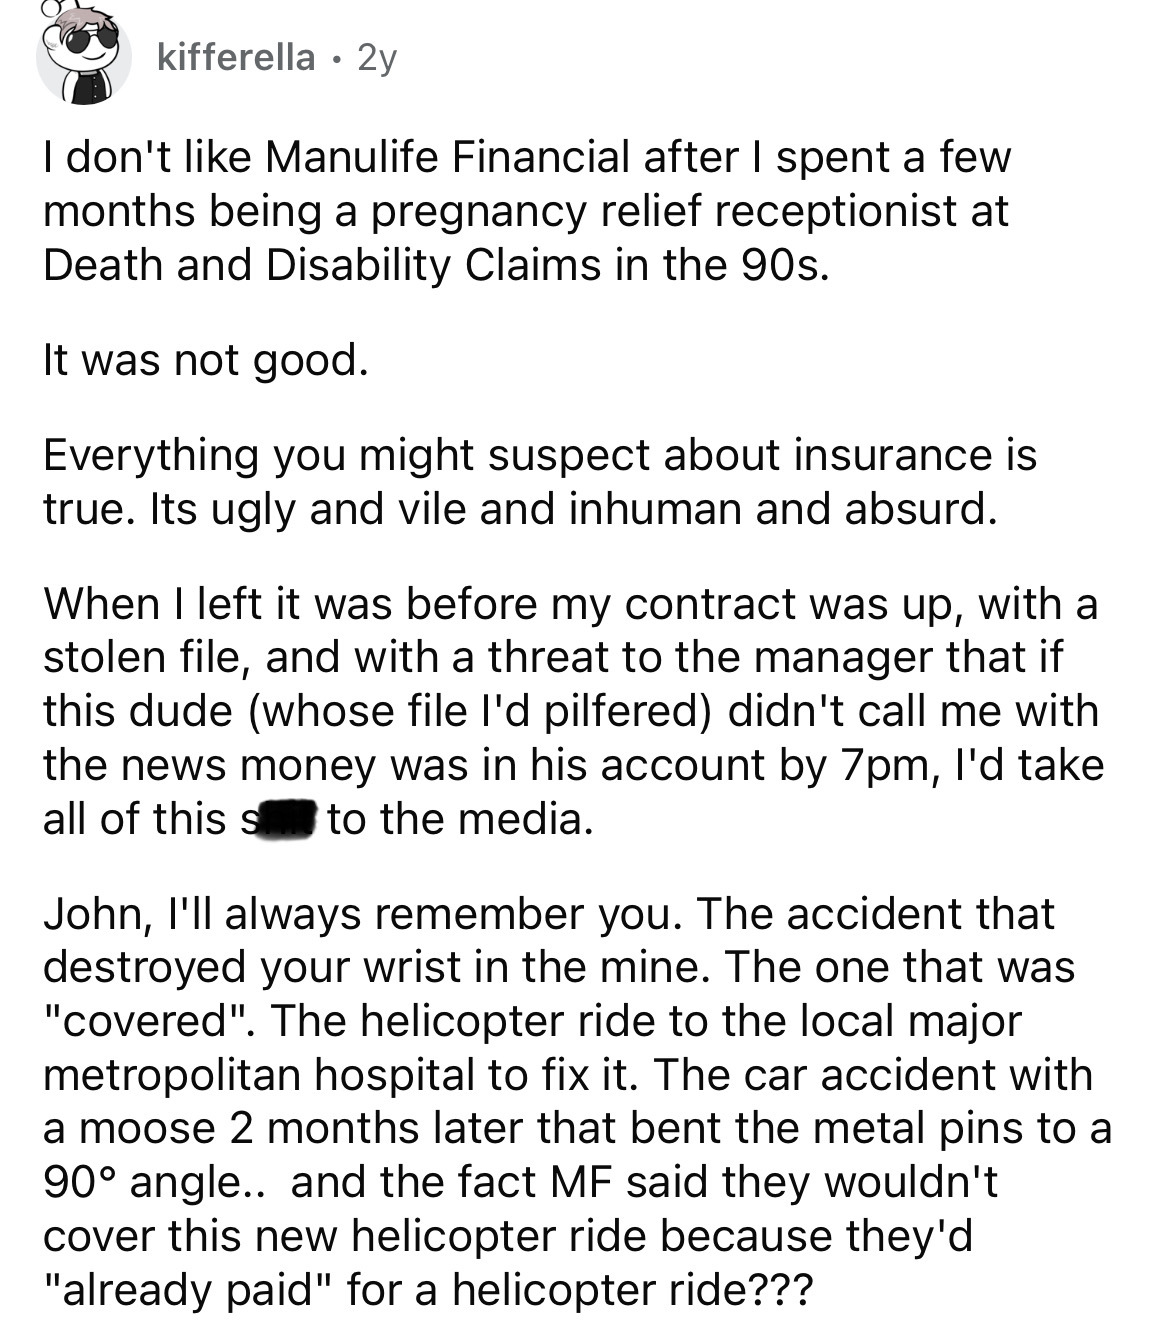 document - kifferella 2y I don't Manulife Financial after I spent a few months being a pregnancy relief receptionist at Death and Disability Claims in the 90s. It was not good. Everything you might suspect about insurance is true. Its ugly and vile and in